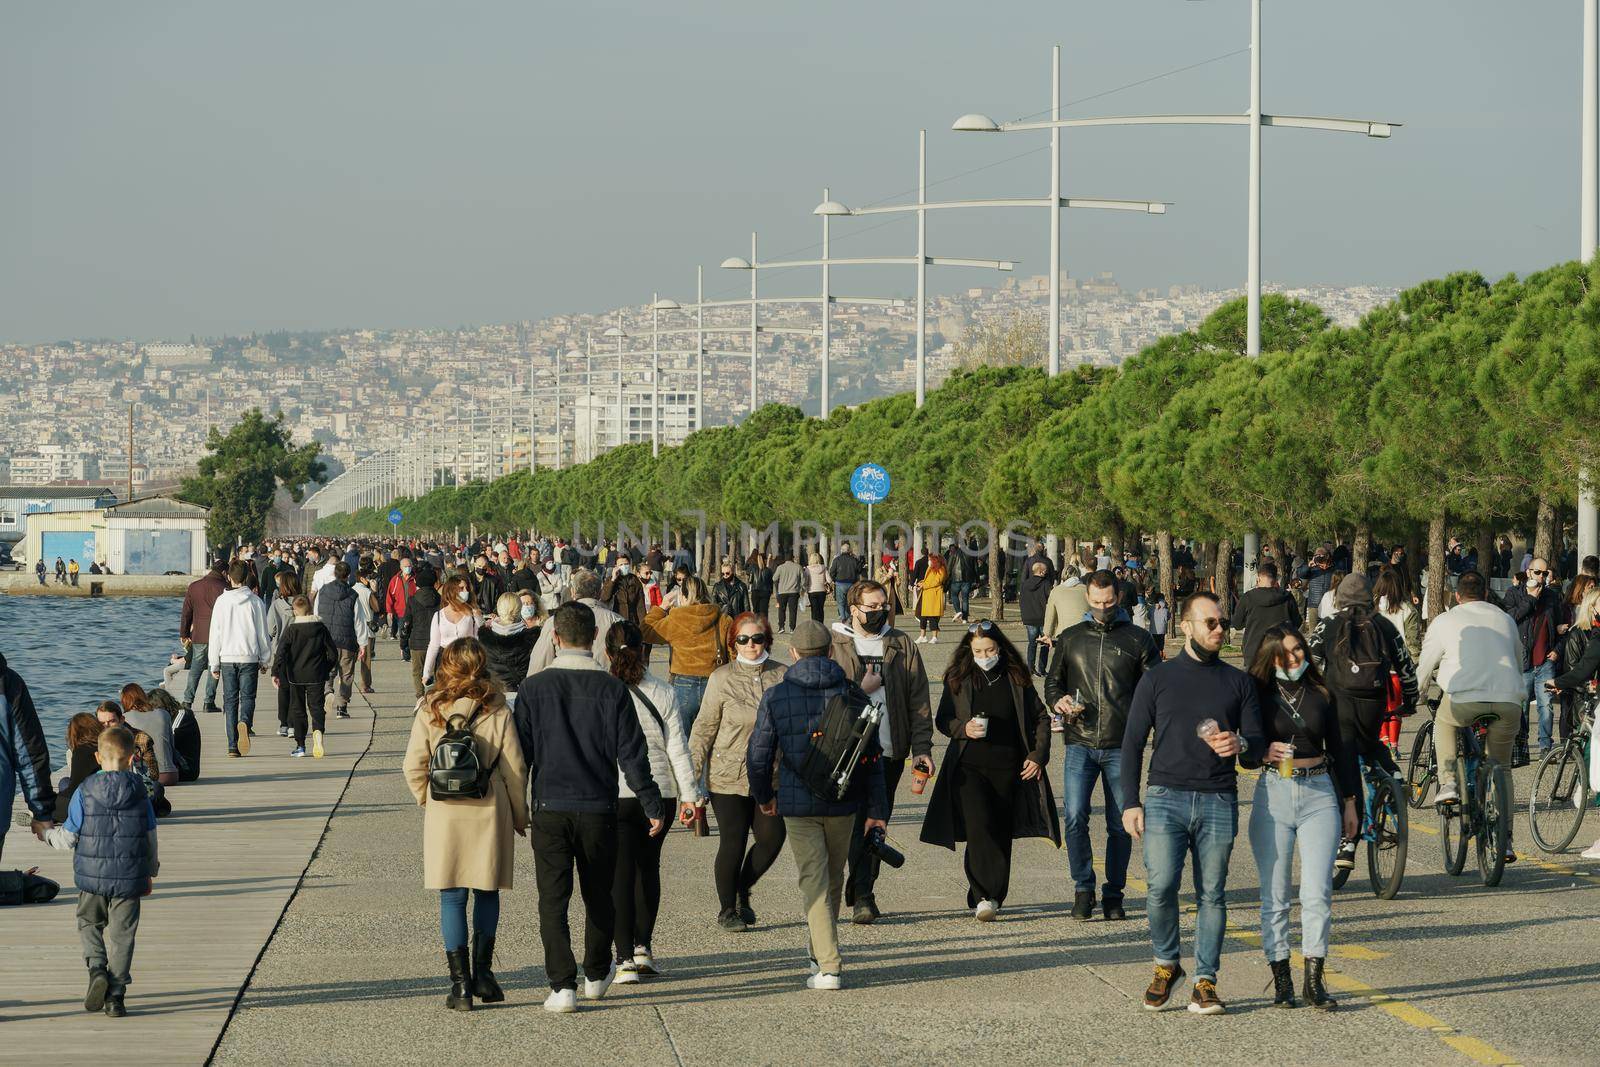 Unidentified persons with face protection walk at close distance on the pedestrian area of the city waterfront in Thessaloniki, Greece.